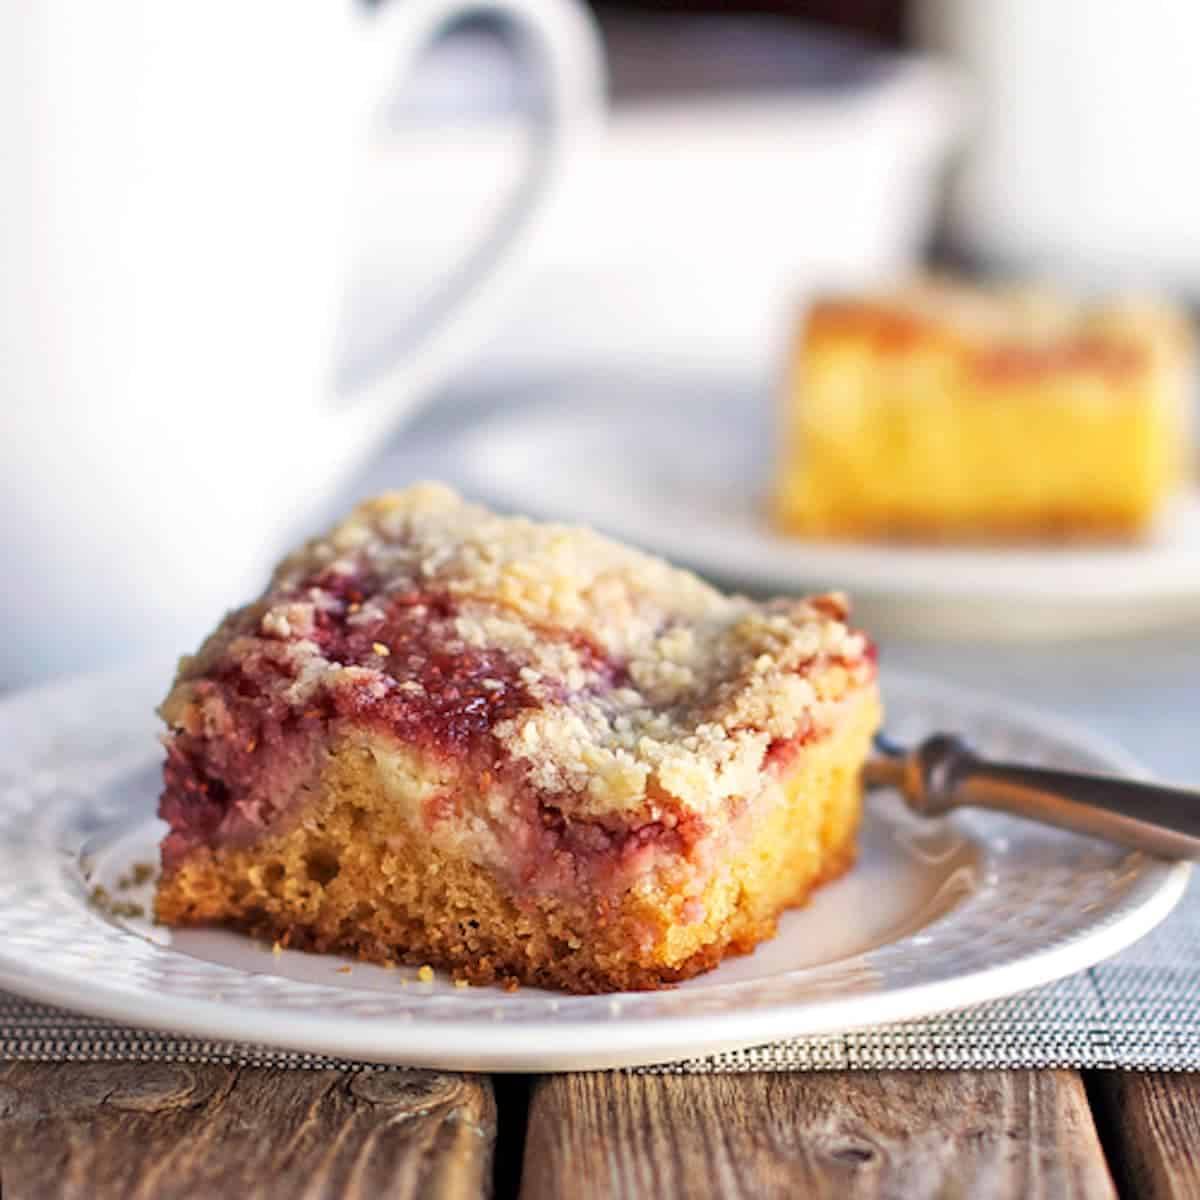 Raspberry cream cheese coffee cake on a plate with a fork.